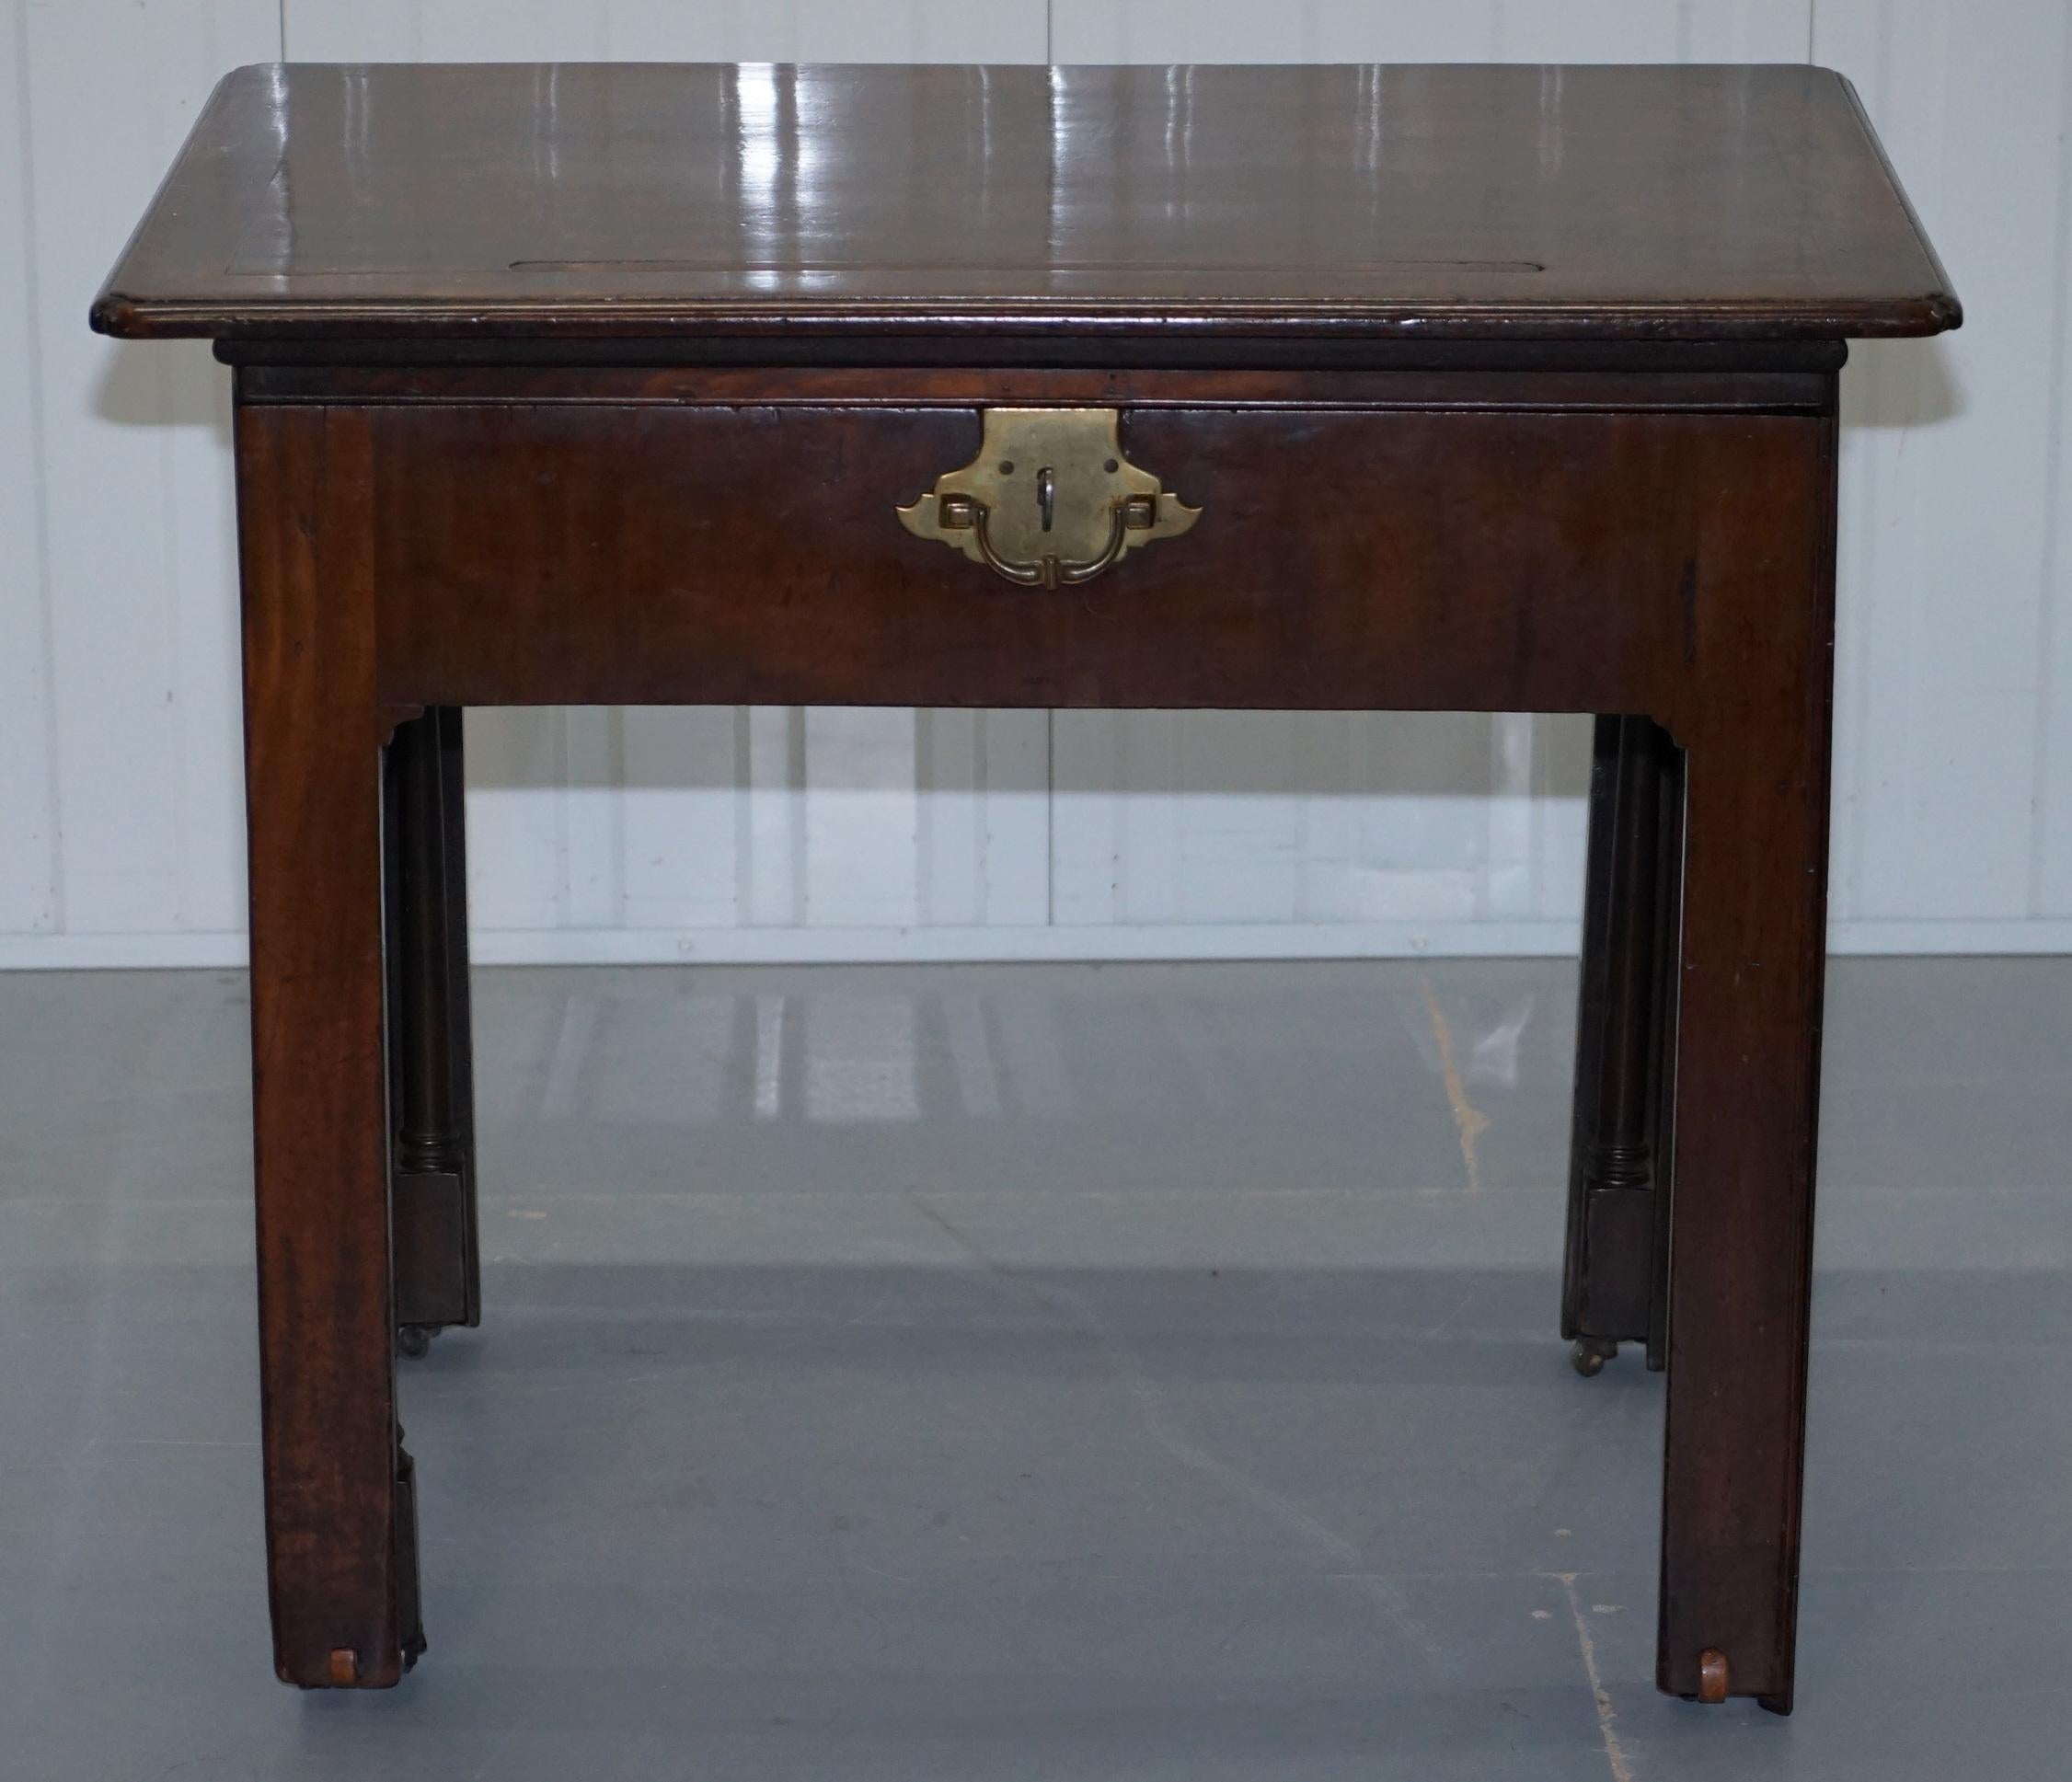 We are delighted to offer for sale this very rare original George III circa 1760 Architects writing Georgian Irish table desk in solid mahogany with original lock and key

A beautiful find with the original well used patina throughout. As you can